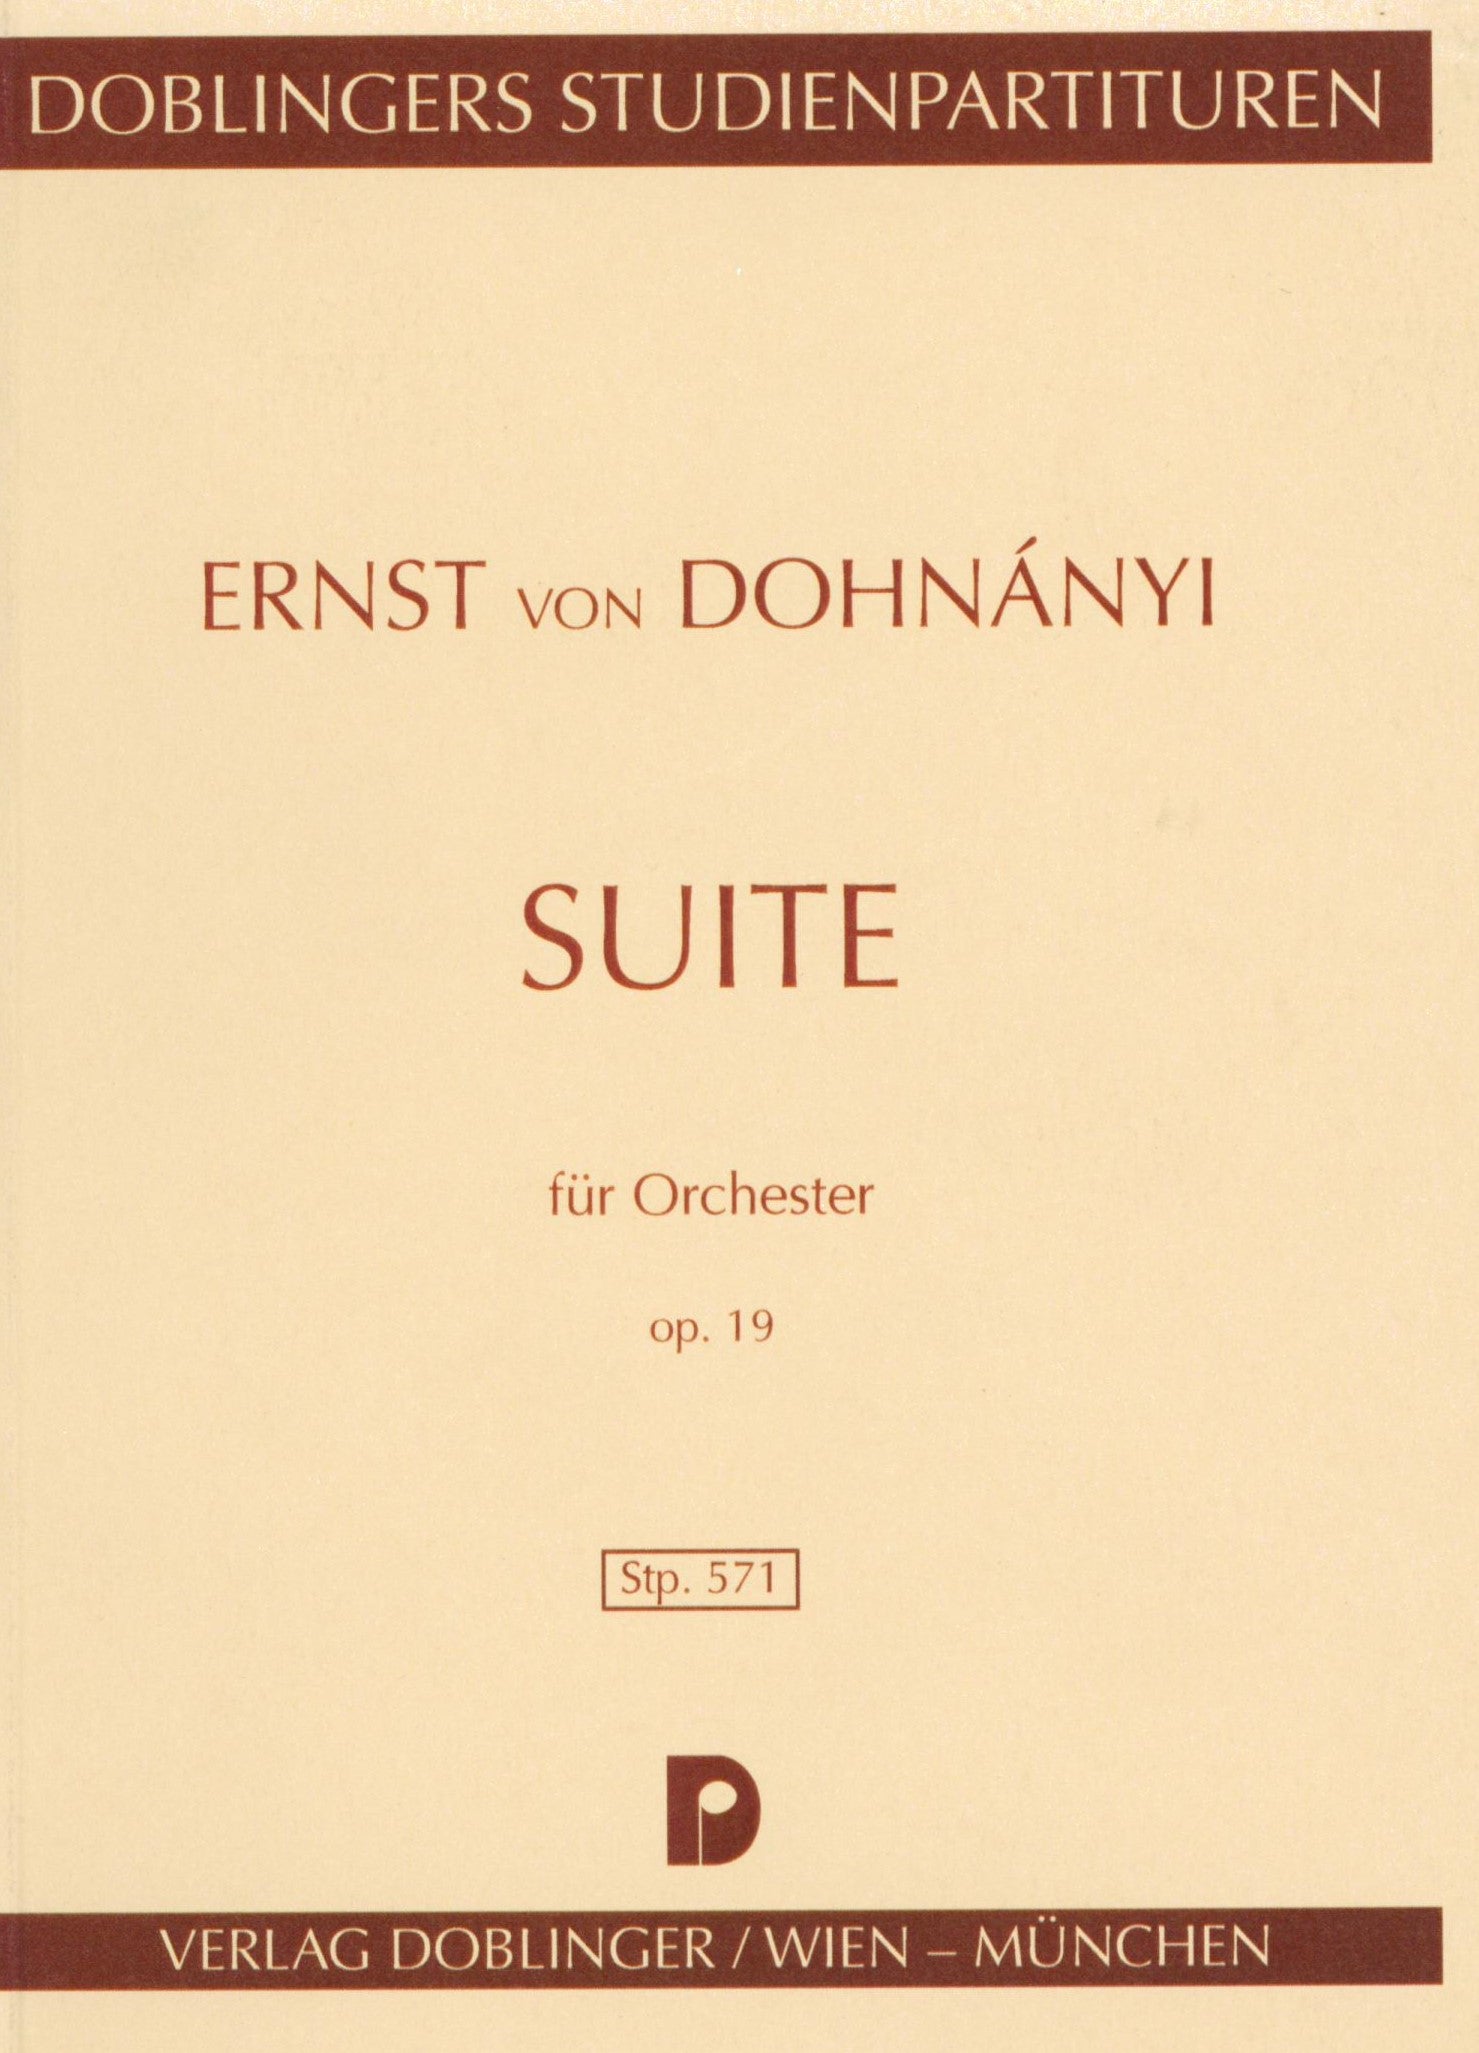 Dohnányi: Suite for Orchestra, Op. 19